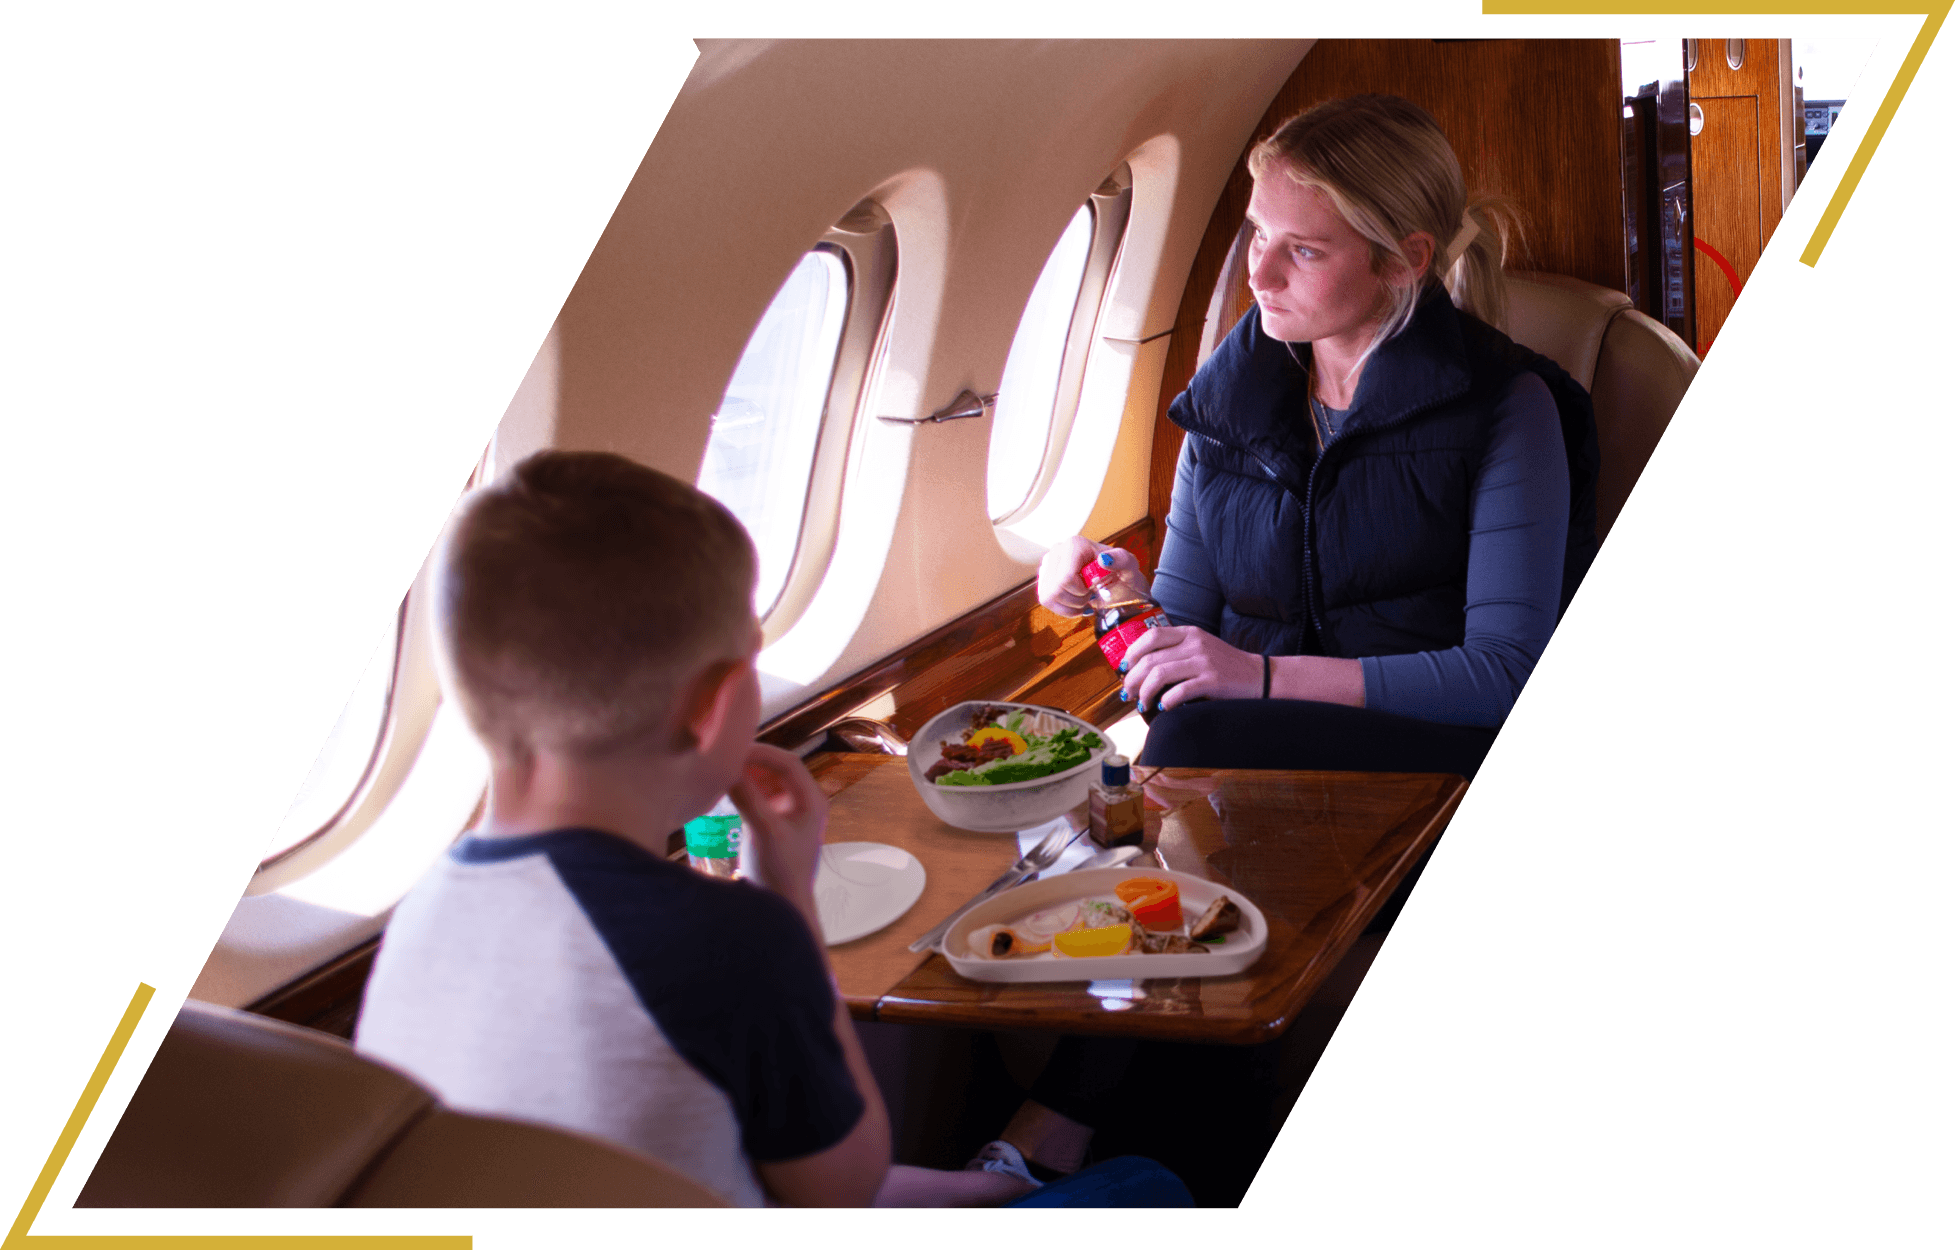 Griffing Flying Service's private aircraft feature state-of-the-art luxury with fully reclining, plush leather seating, work tables, and plenty of legroom to stretch out.